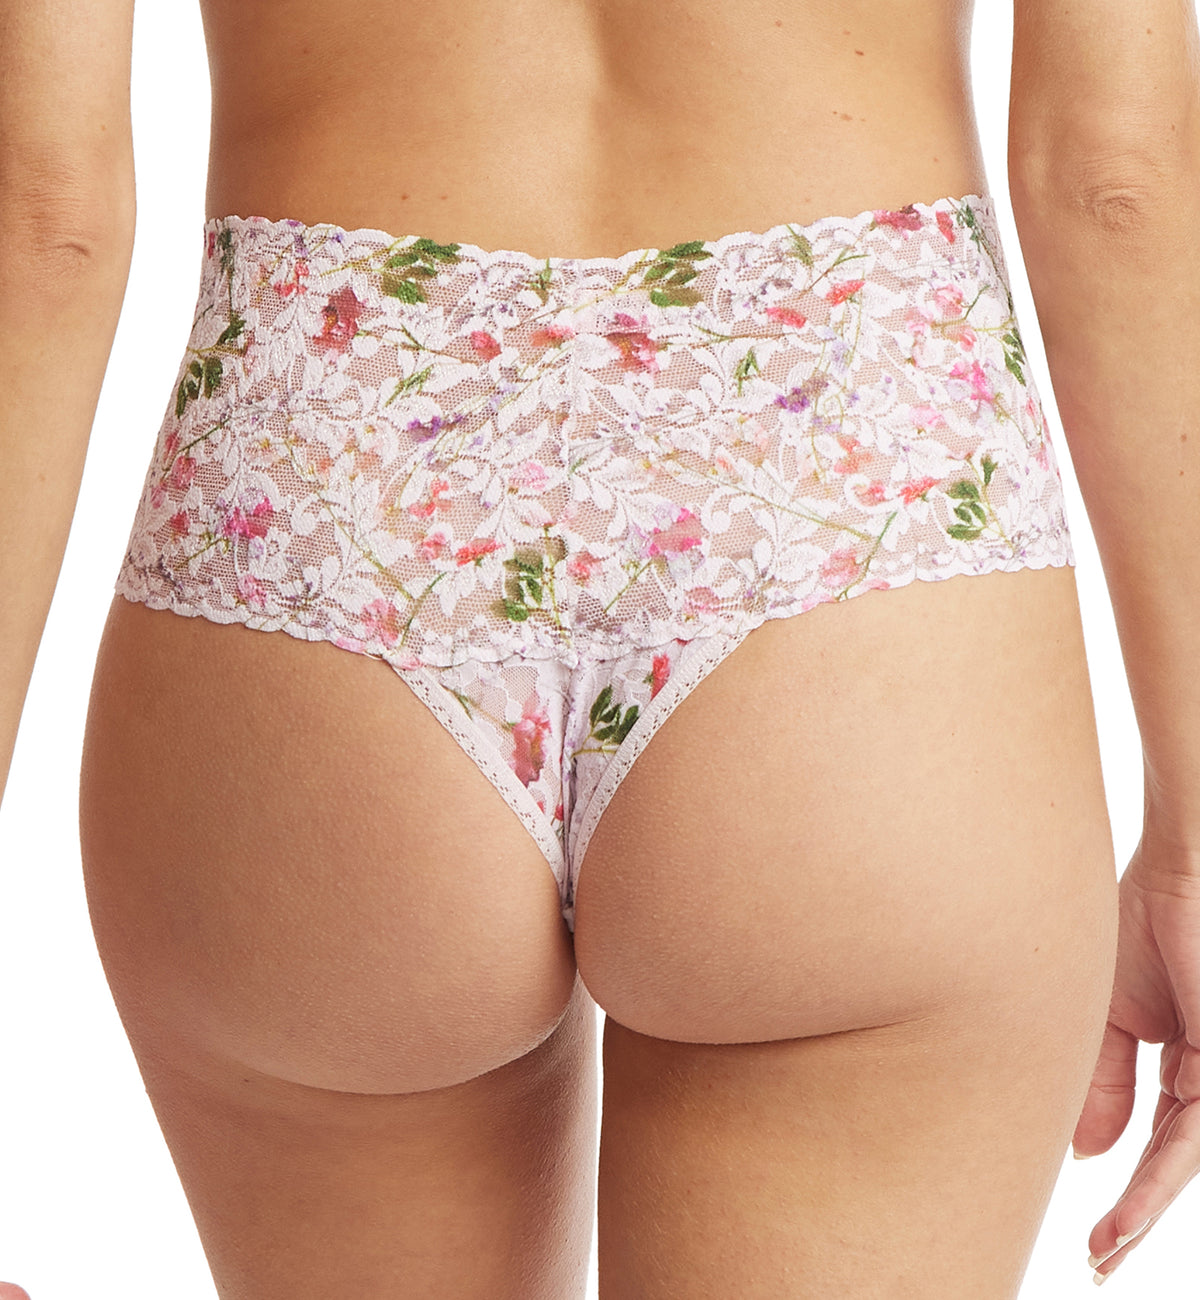 Hanky Panky Printed Retro Lace Thong (PR9K1926),Rise and Vines - Rise and Vines,One Size